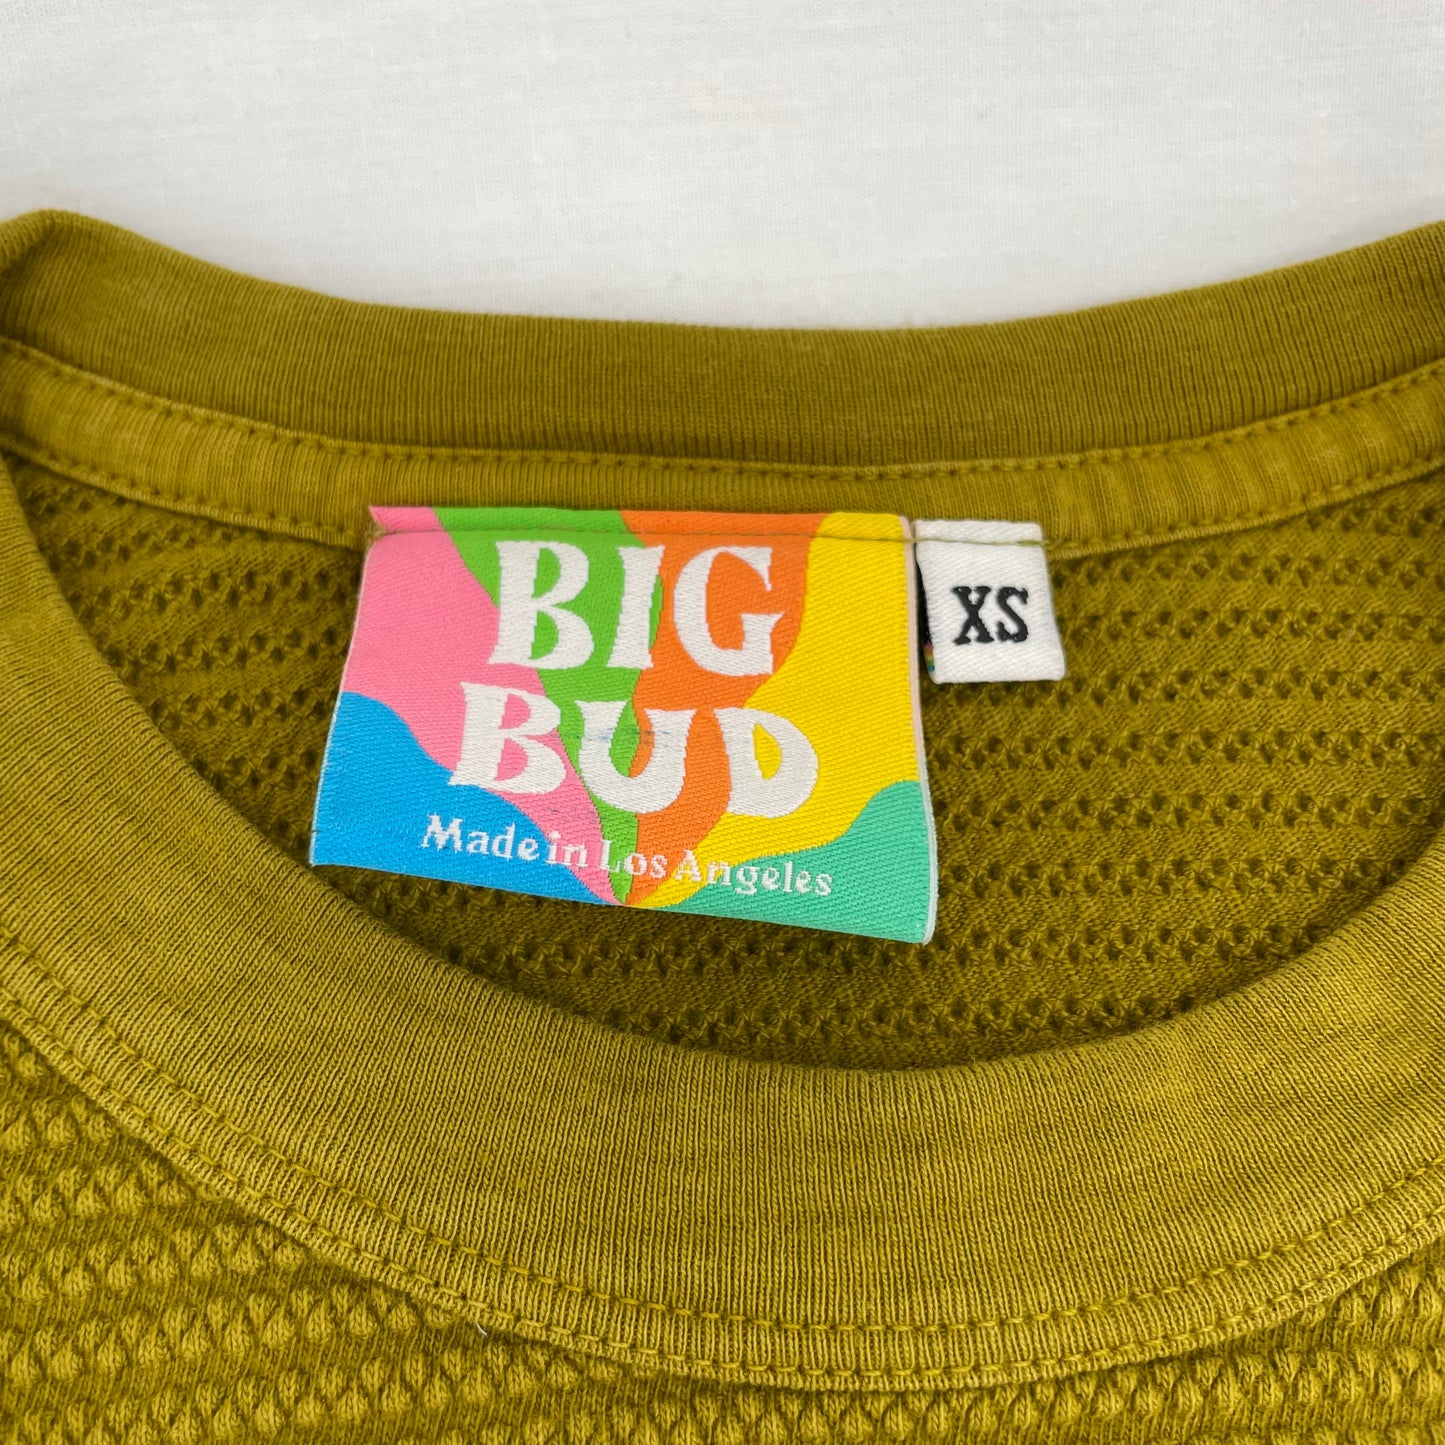 Big Bud Press Honeycomb Texture Thermal Tee Olive Green Long Sleeve Cotton Top Unisex Size XS